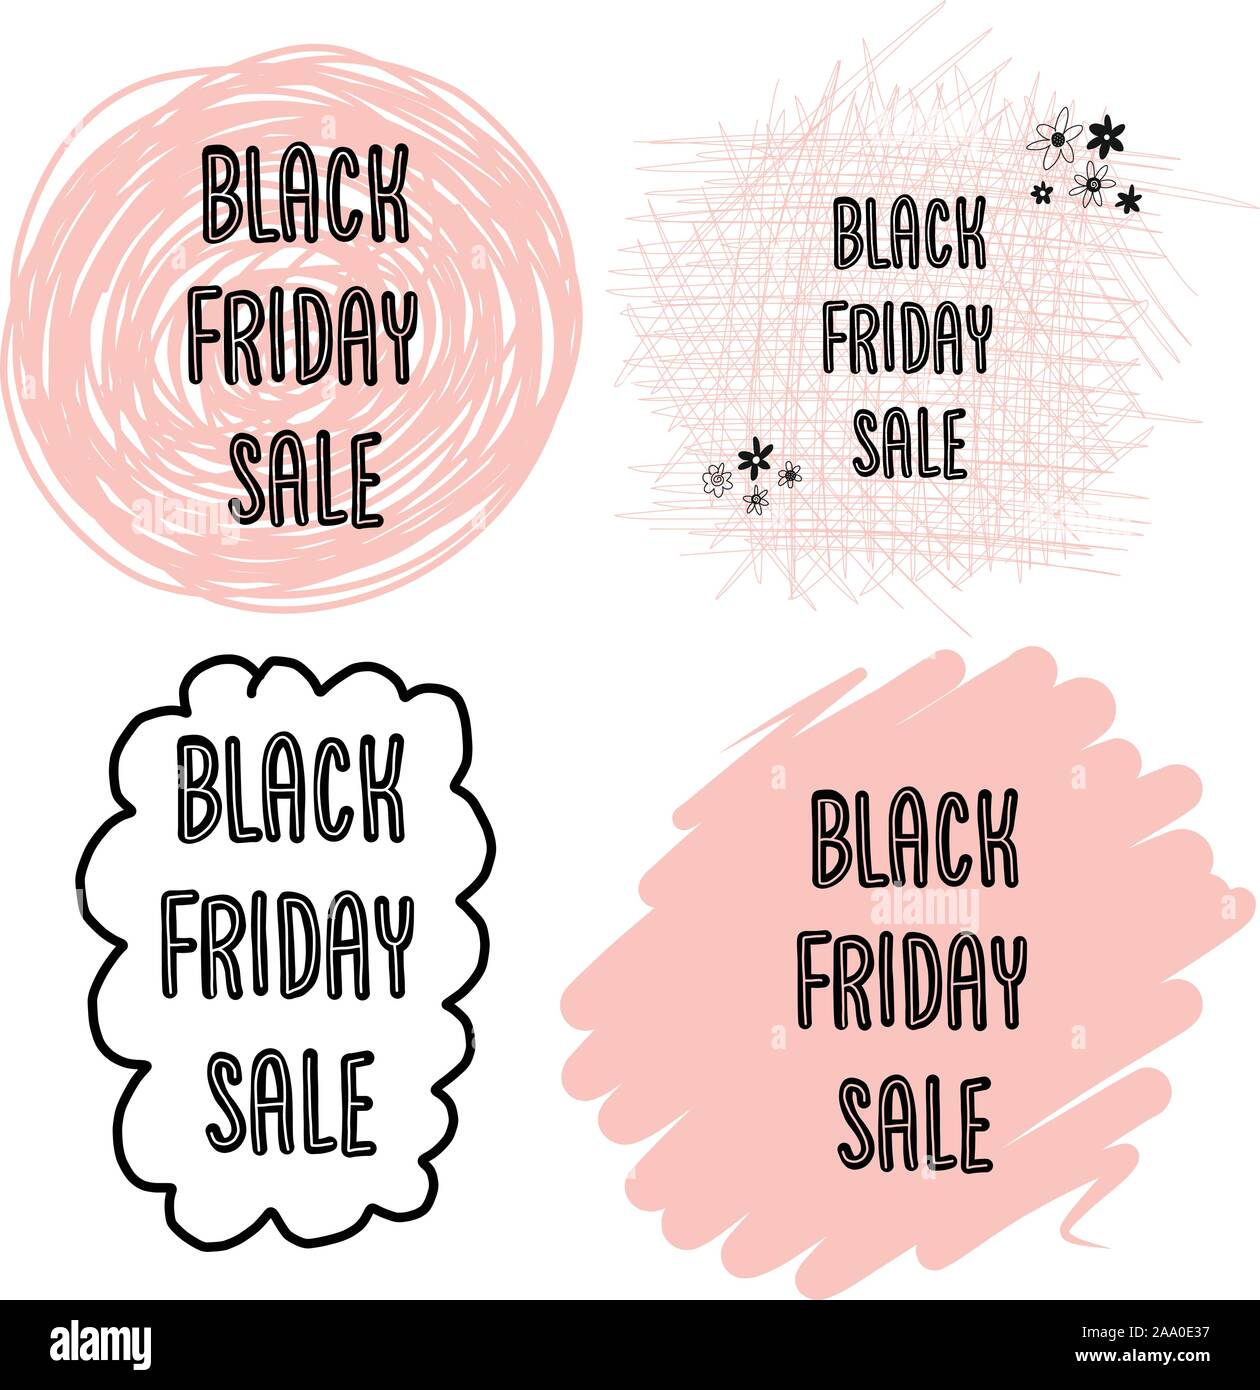 Feminine Black Friday Sales Banner Set Vector. Handwritten typography on dots, circles, scribbles in pink for promotional flyers, cards. Cute women Stock Vector